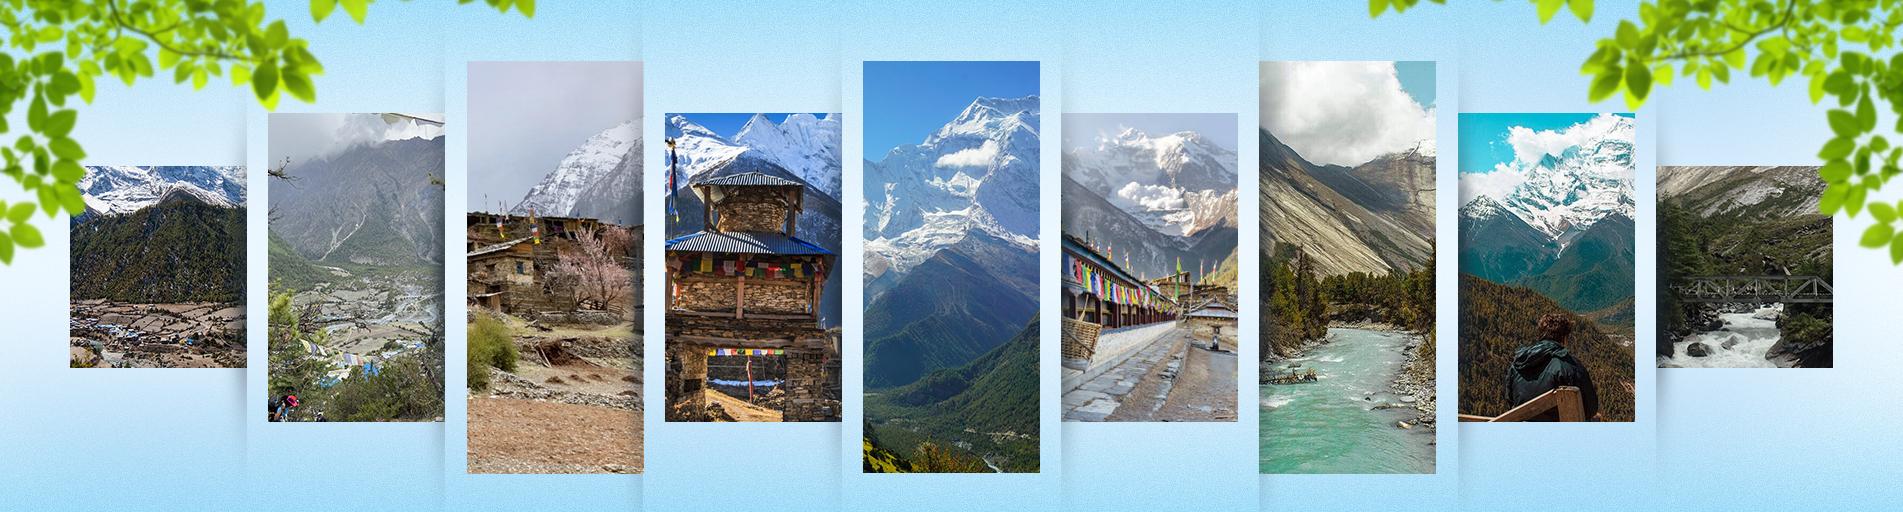 Upper and Lower Pisang: A Guide to remote villages in Annapurna Circuit trek